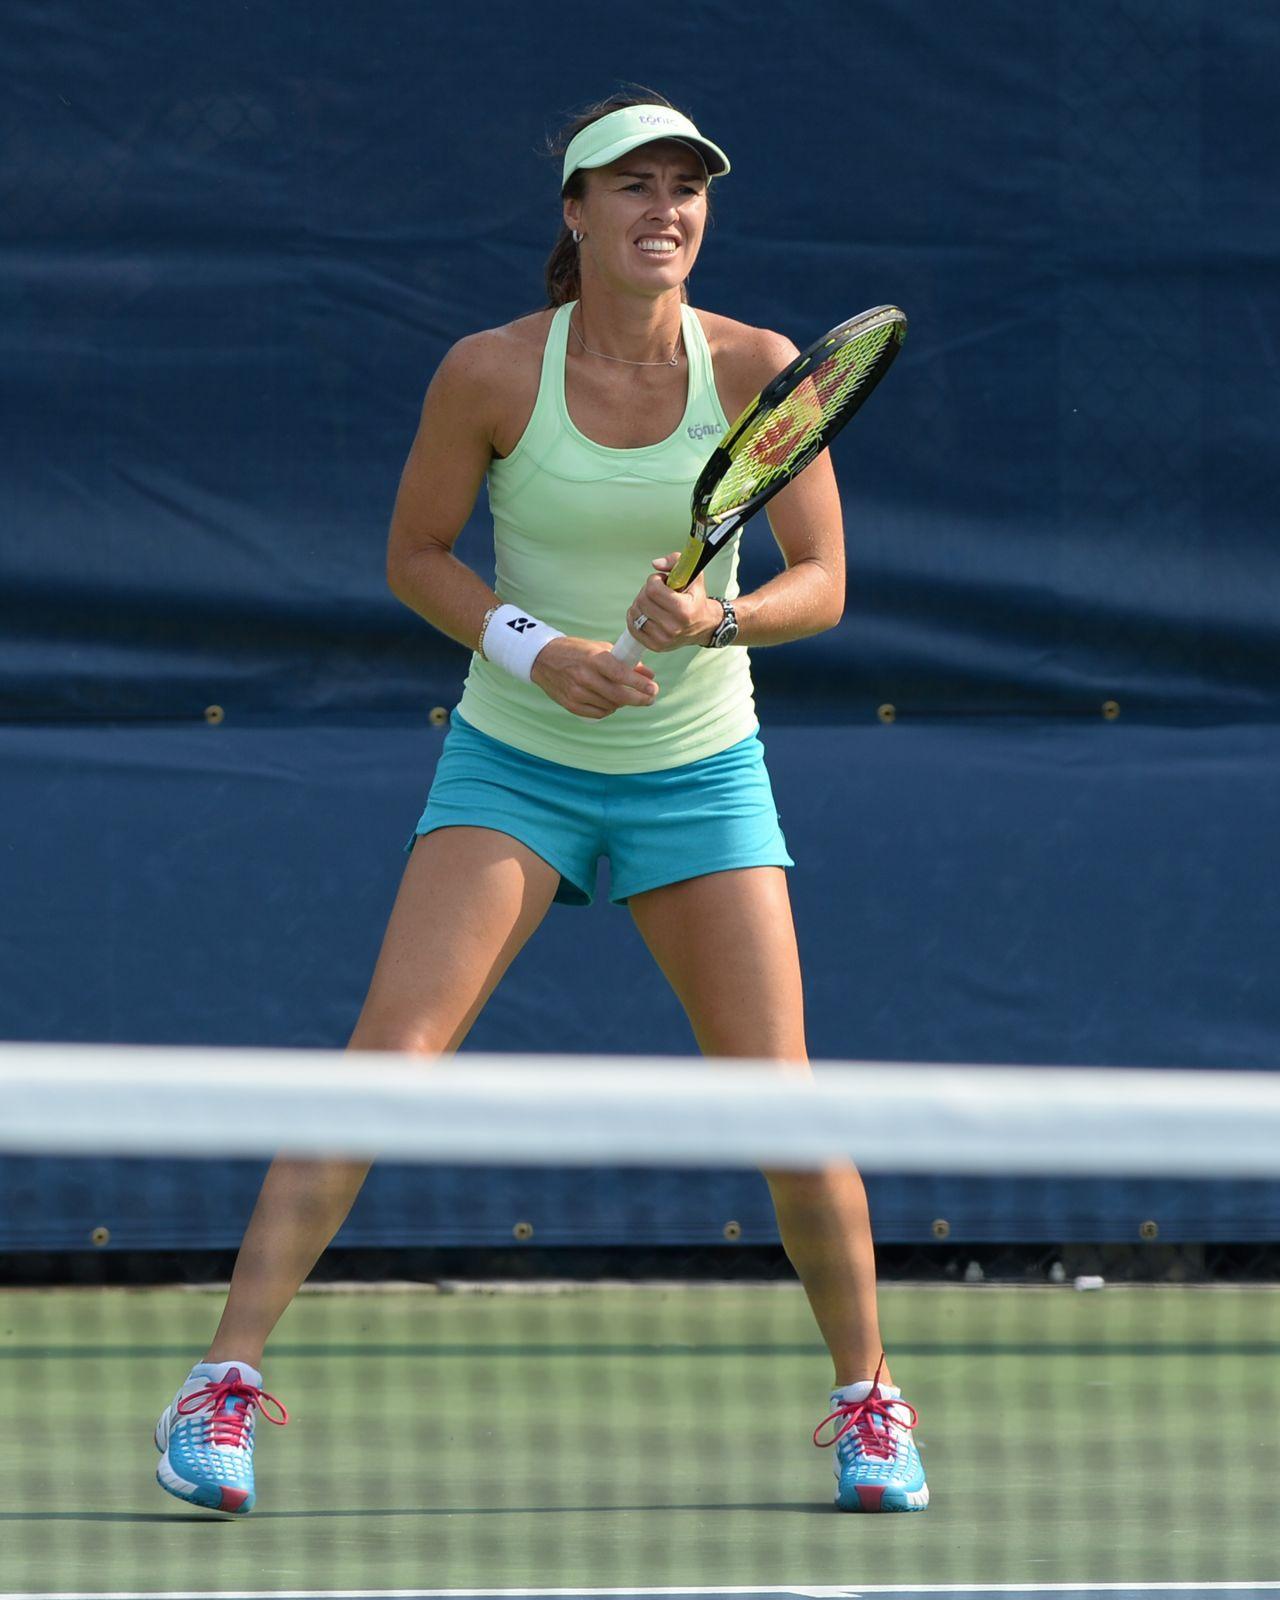 Martina Hingis Session in New York, August 2015